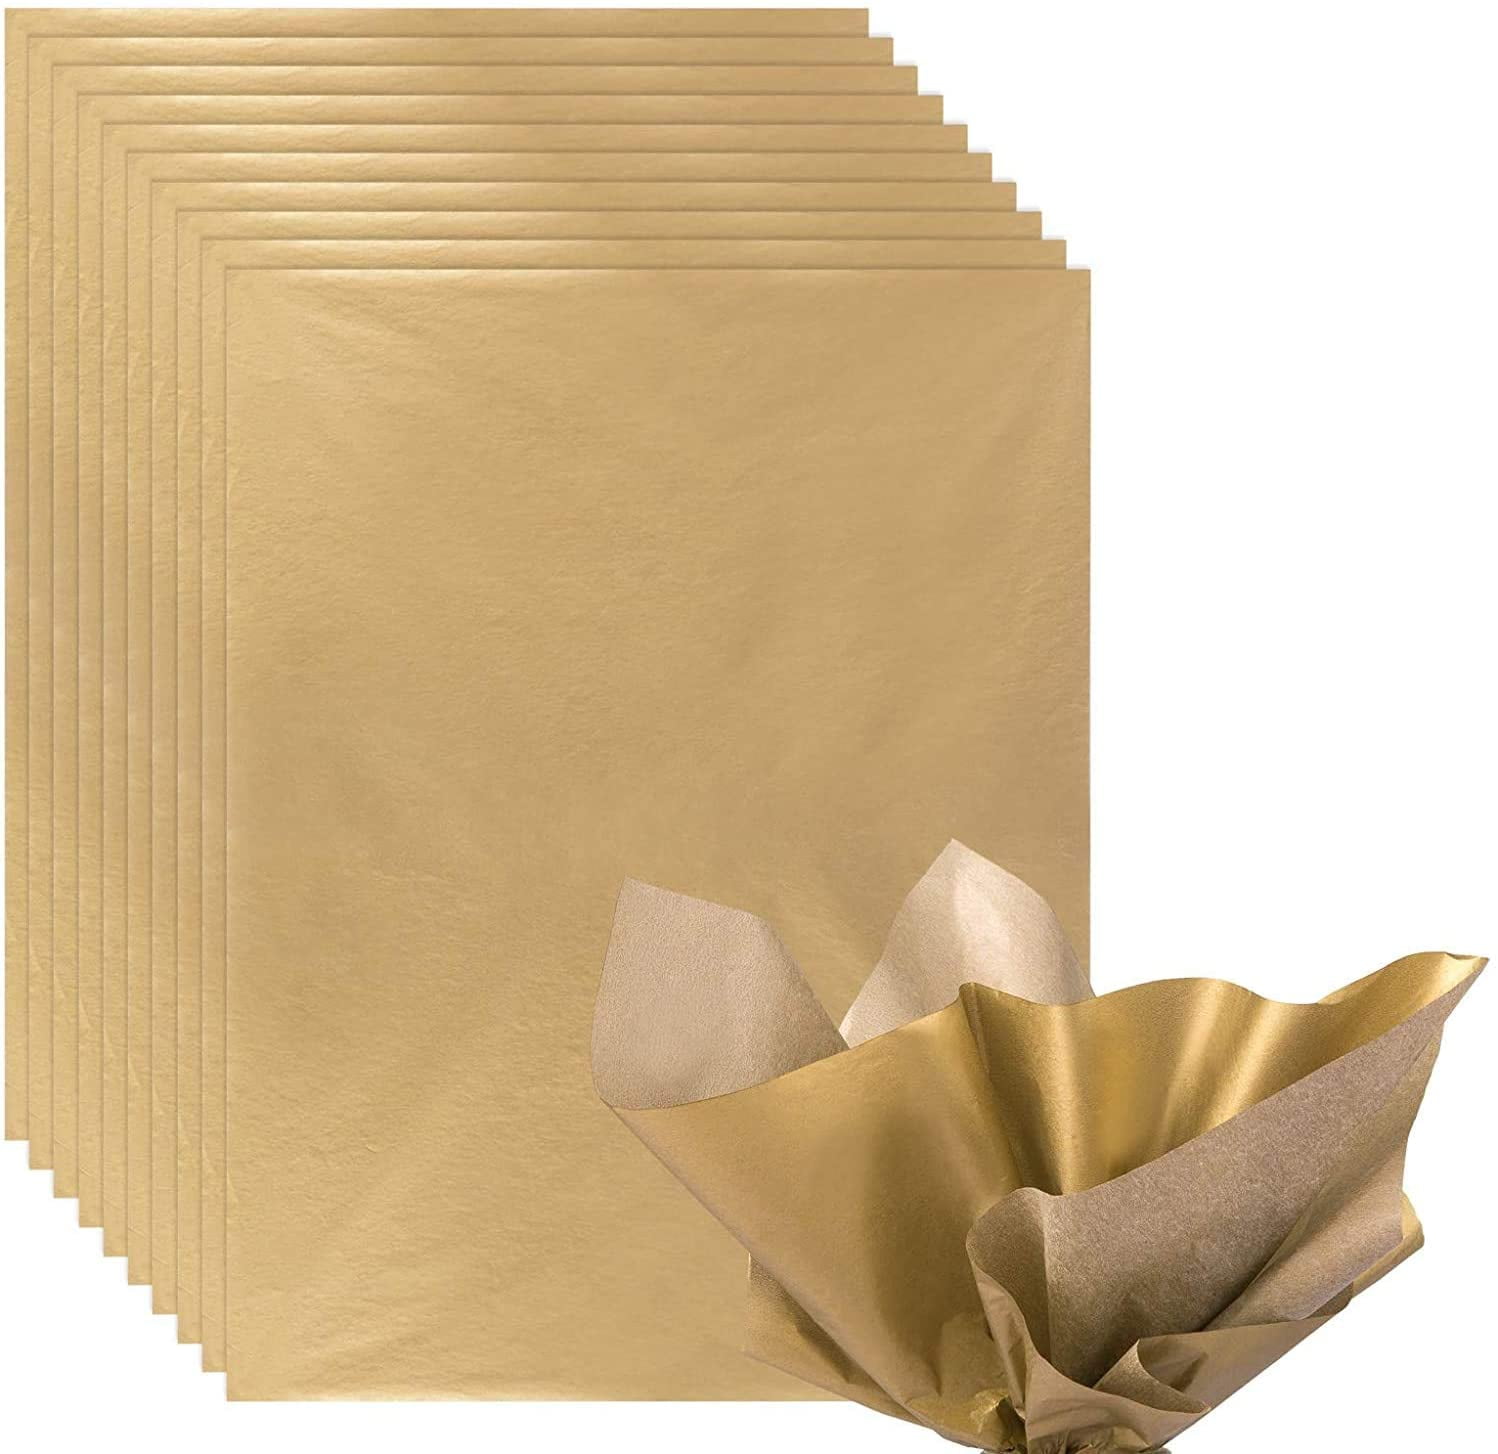 60 Sheets Metallic Gold Star Tissue Paper Bulk for Gift Wrapping Bags &  Packaging, Small Business